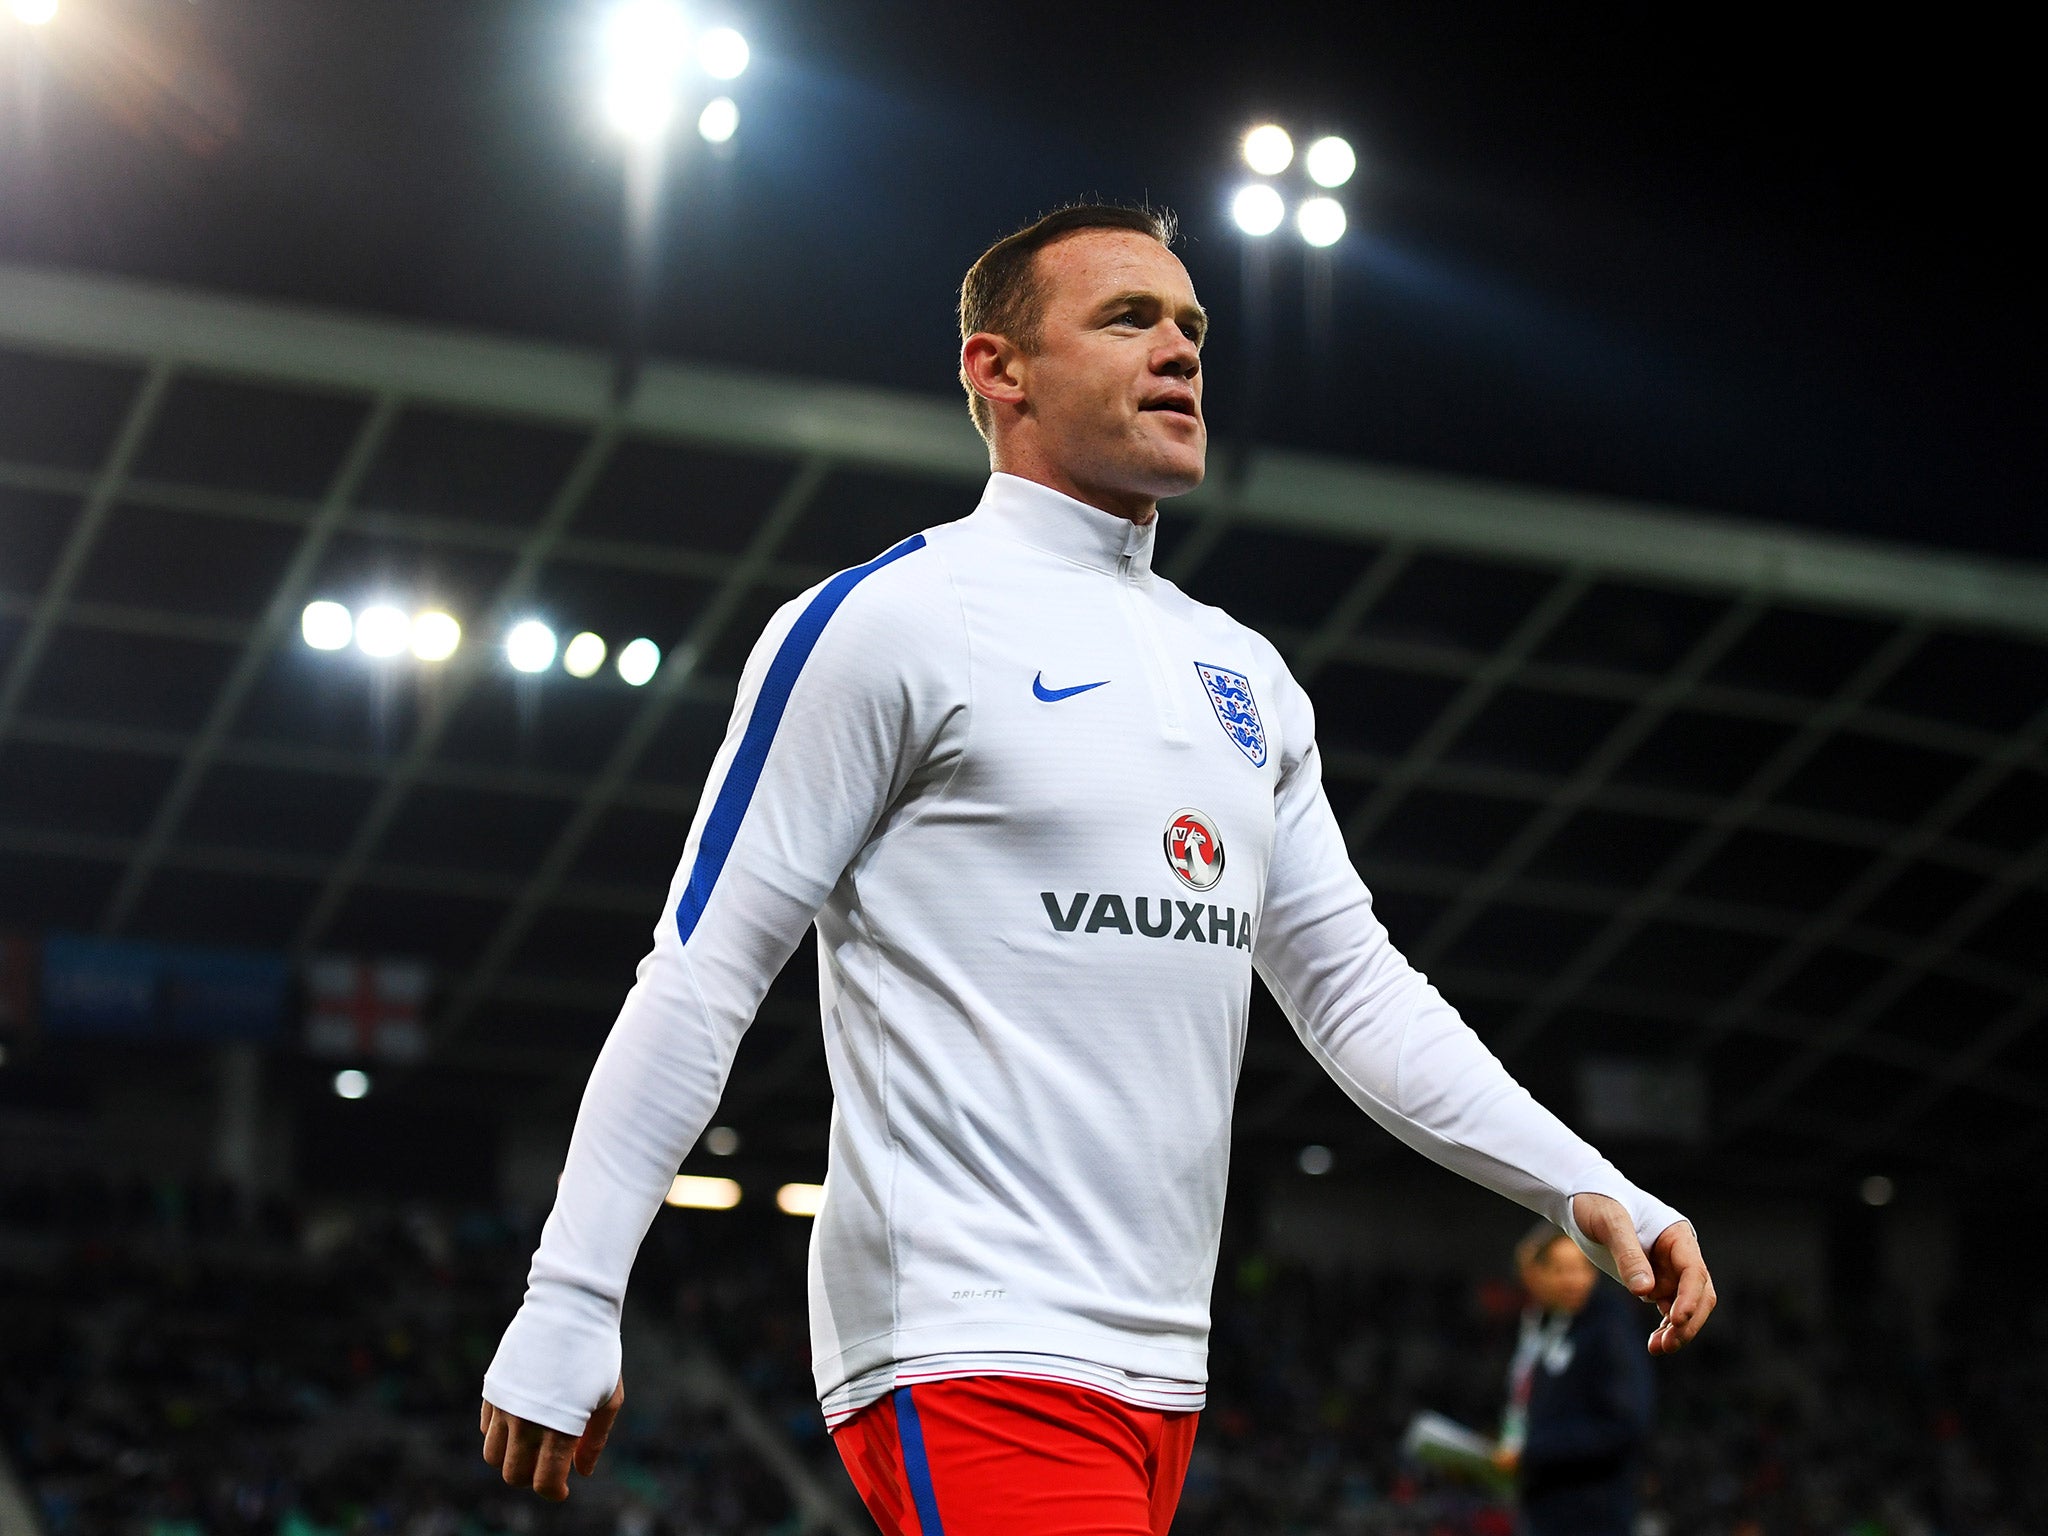 Wayne Rooney will not be booed by Manchester United fans like he was for England, says Jose Mourinho